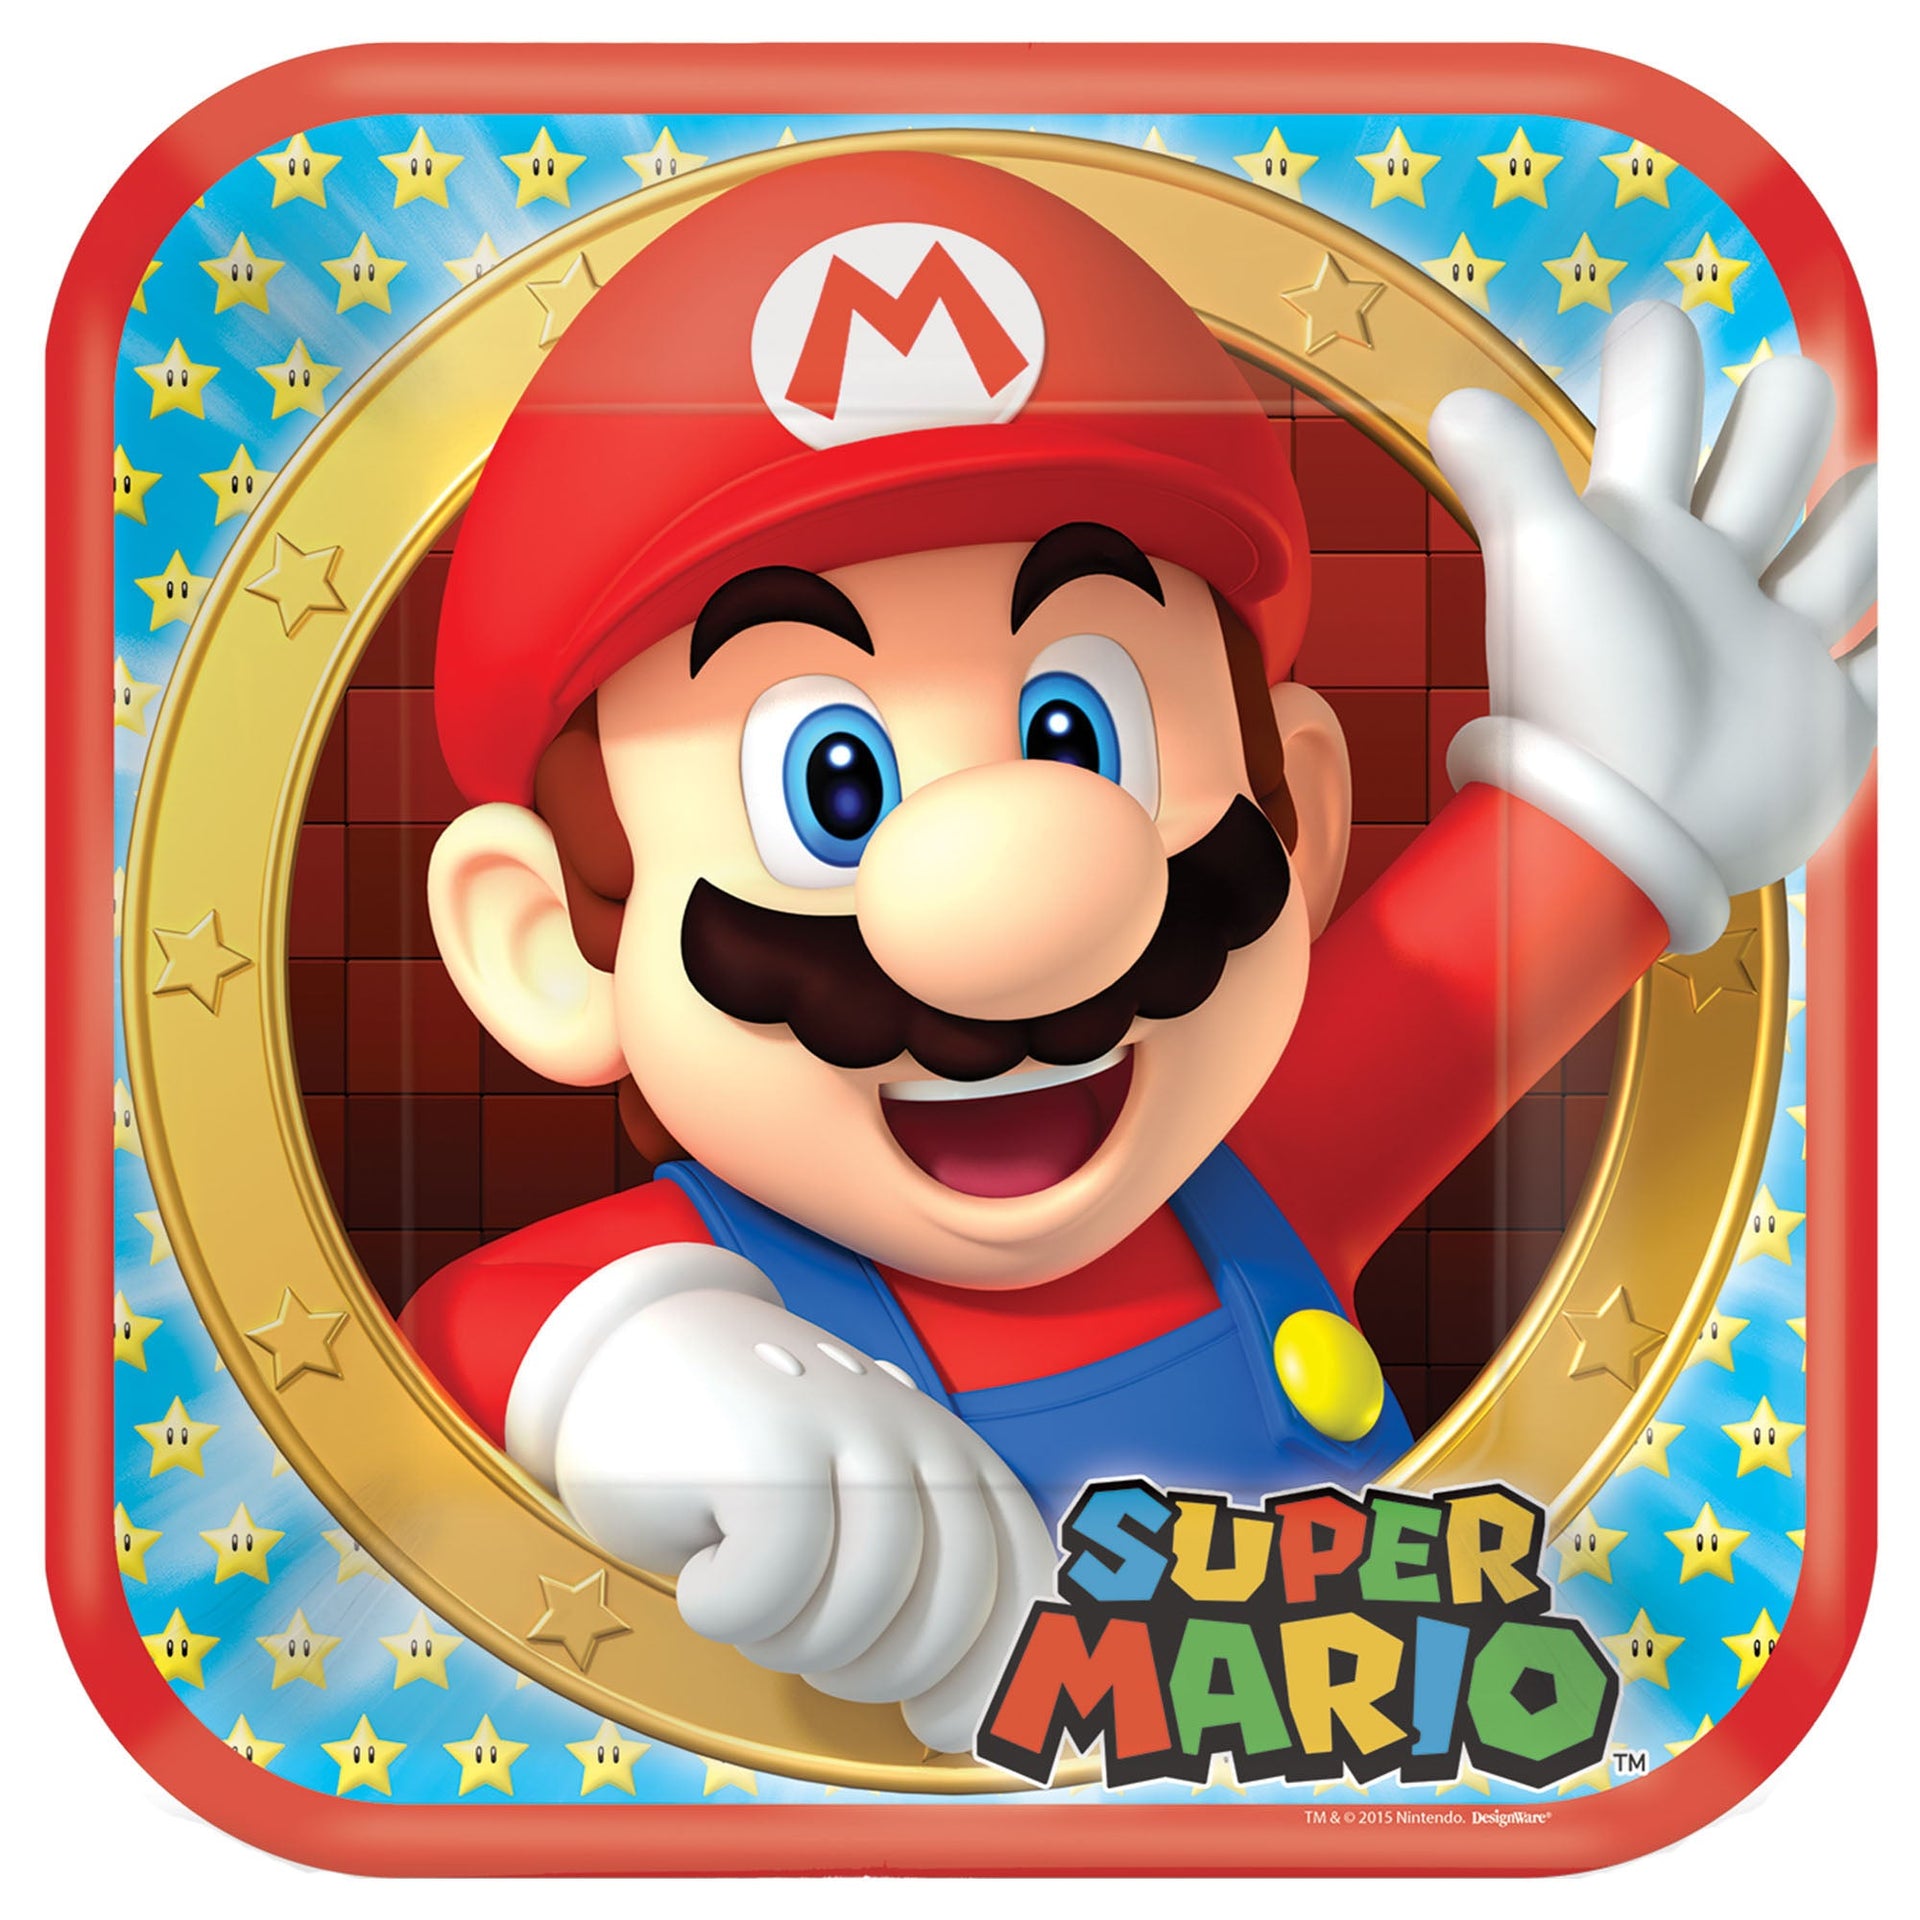 Super Mario Brothers Birthday Party Supplies & Decorations